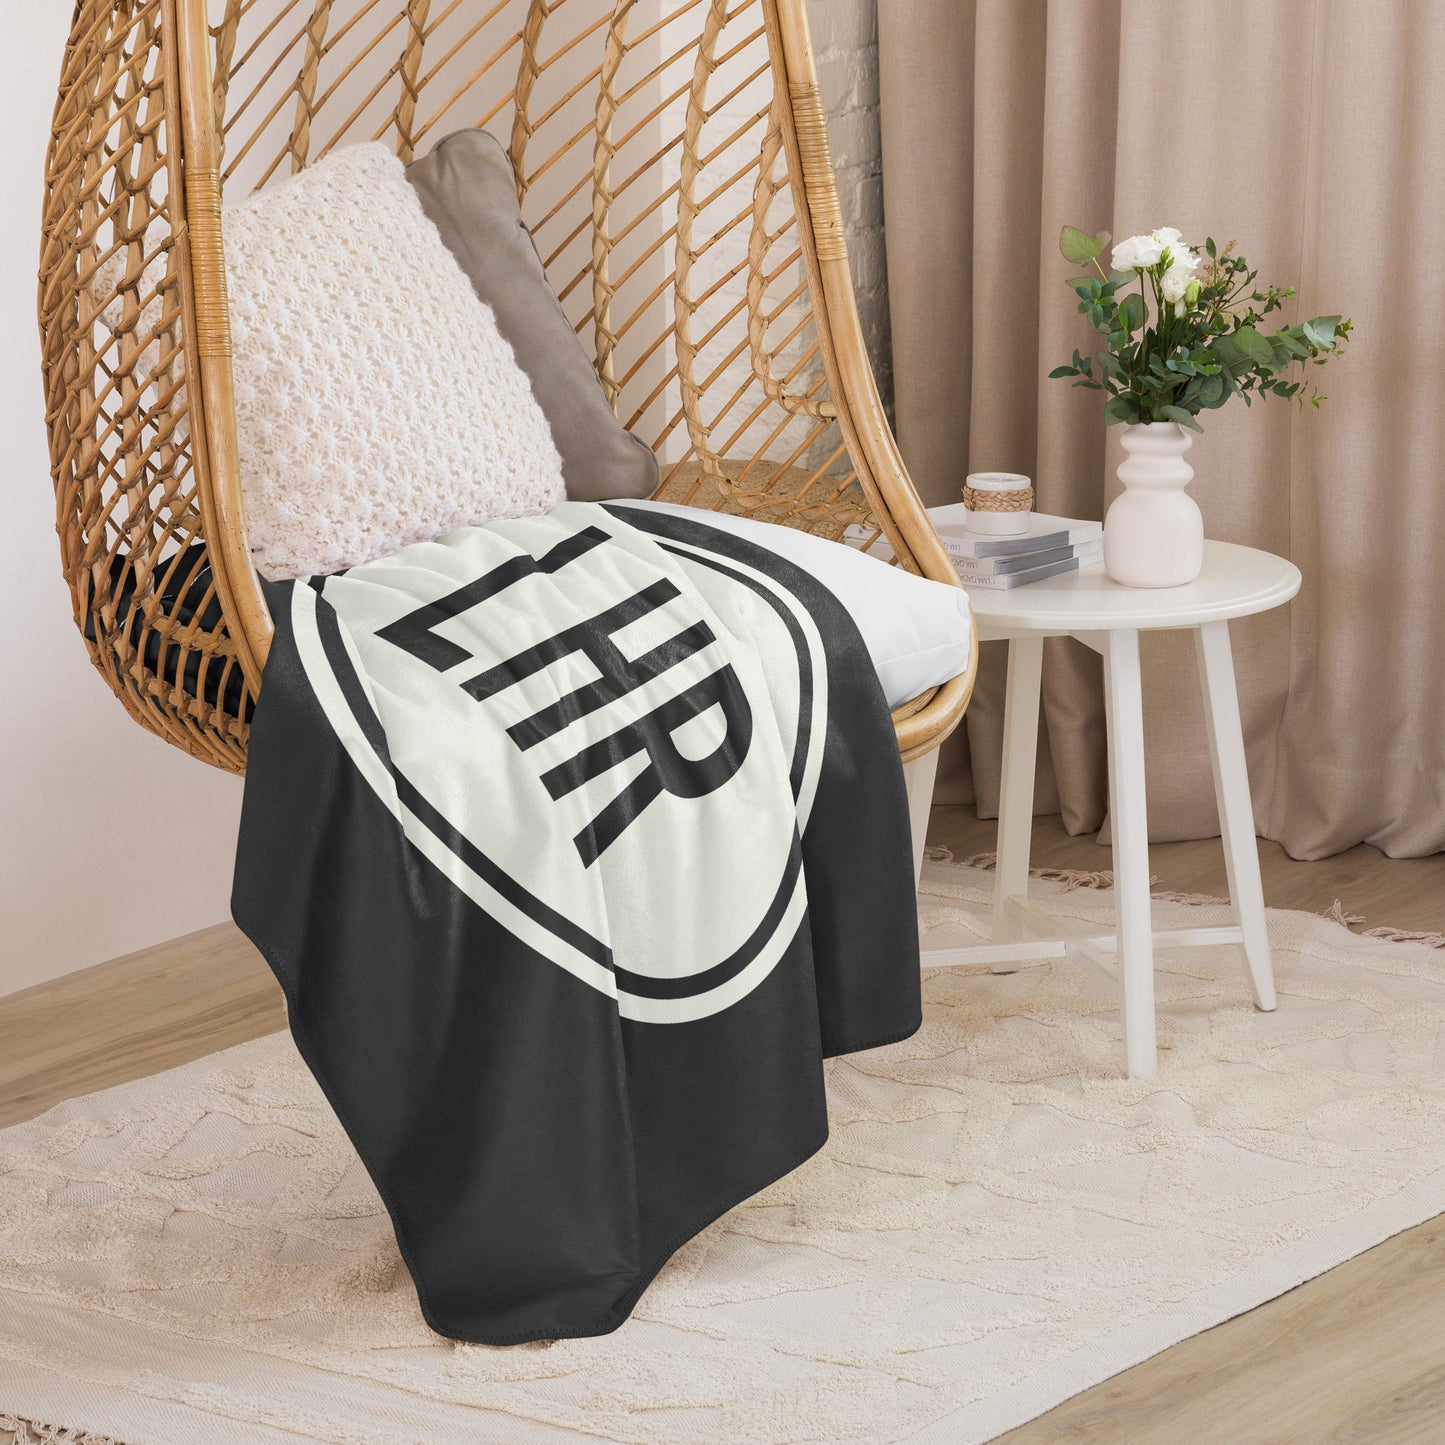 Unique Travel Gift Sherpa Blanket - White Oval • LHR London • YHM Designs - Image 06